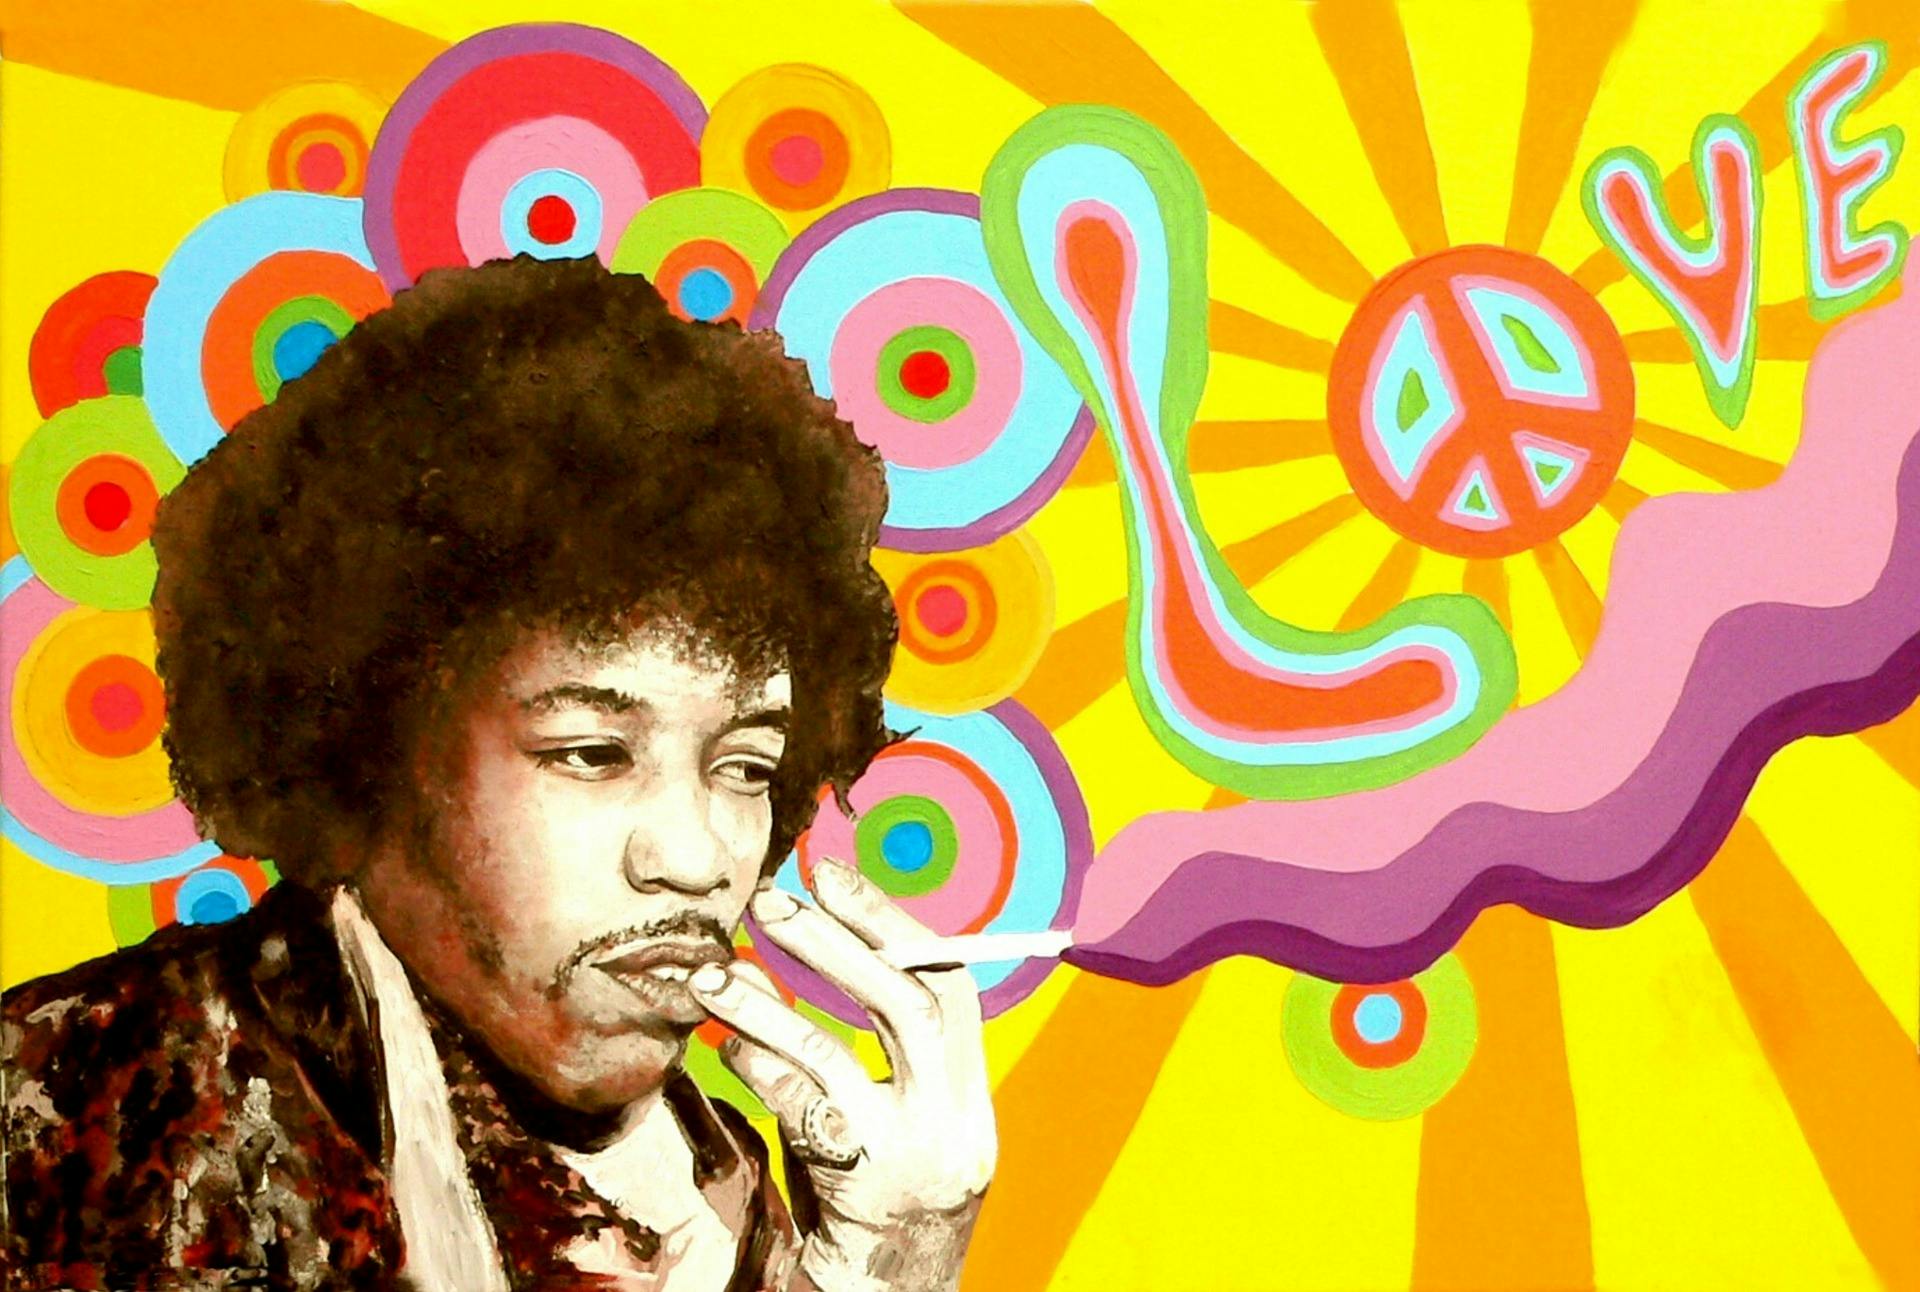 Jimi Hendrix with background text 'love'